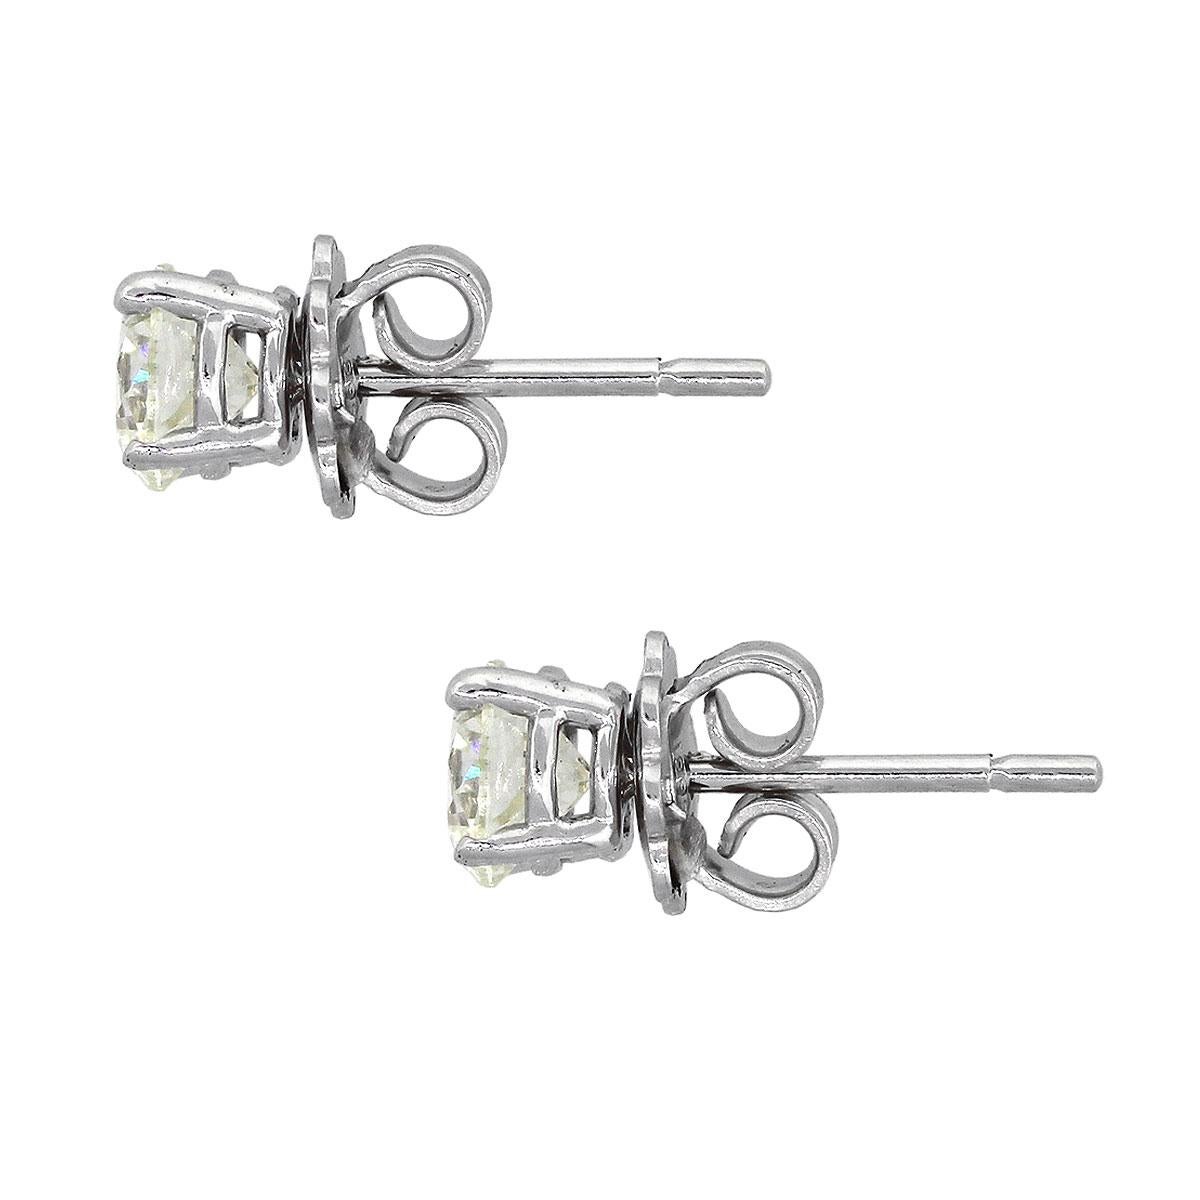 Material: 14k white gold
Diamond Details: Approx. 1.33ctw of round brilliant diamonds. Diamonds are G/H in color and SI-I in clarity
Measurements: 0.60″ x 0.22″ x 0.22″
Earrings Backs: Tension post
Total Weight: 2.1g (1.4dwt)
SKU: A30312445